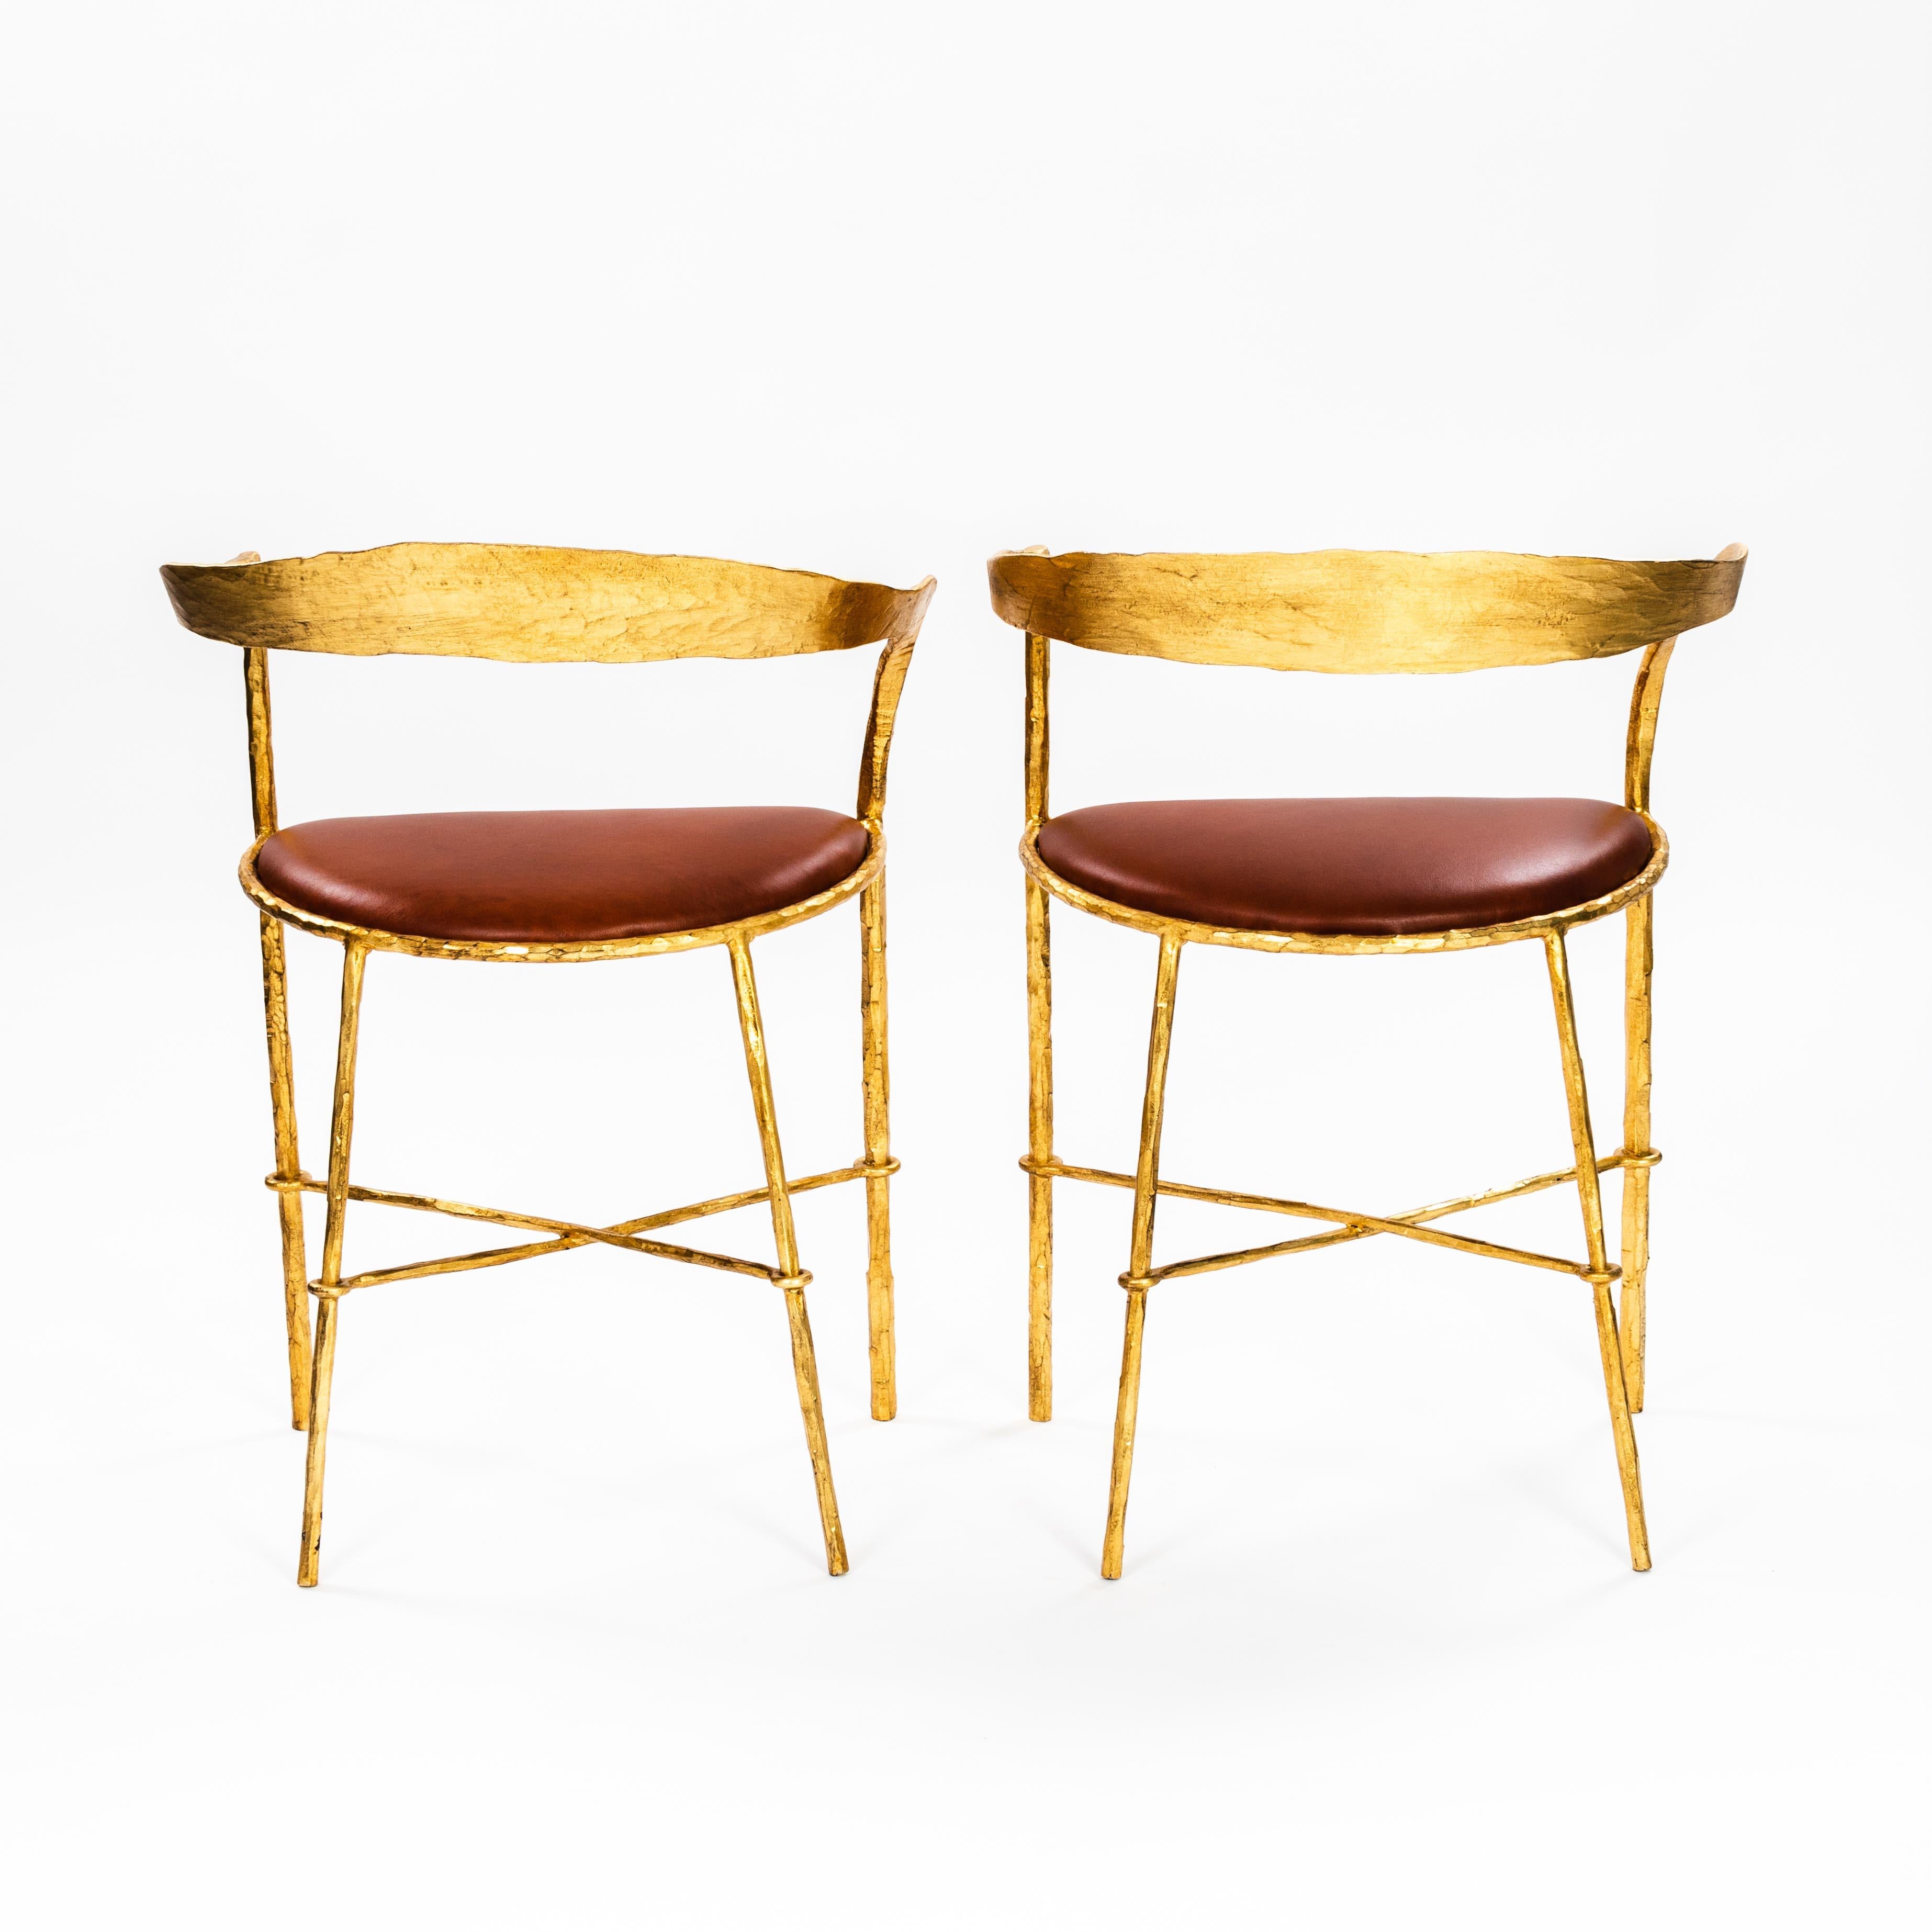 Pair of Hand Forged Gold Plated Mid-Century Armchairs by Banci Florence 1970s For Sale 2